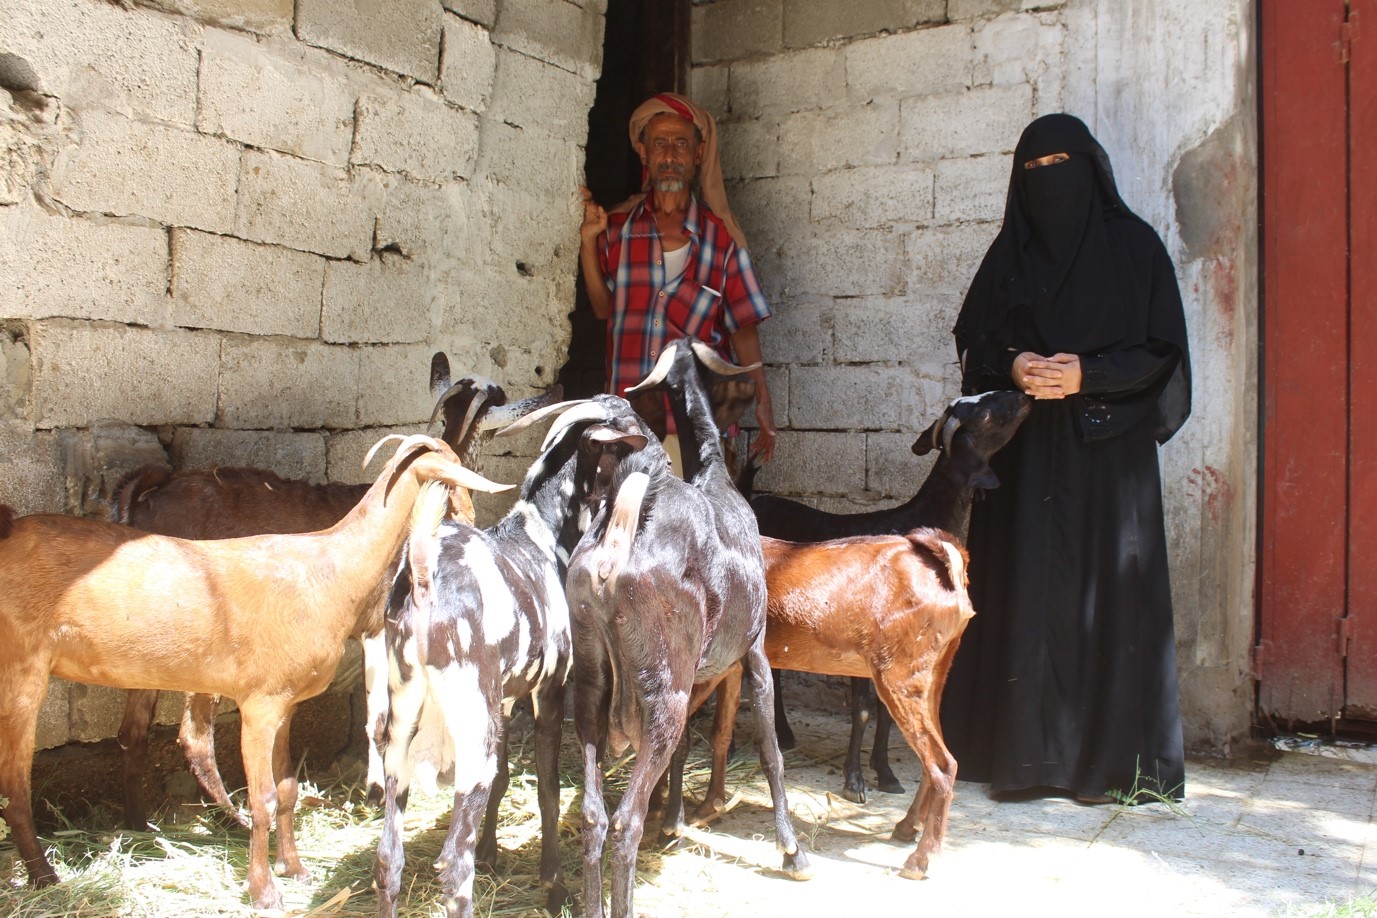 A man and woman standing next to goats